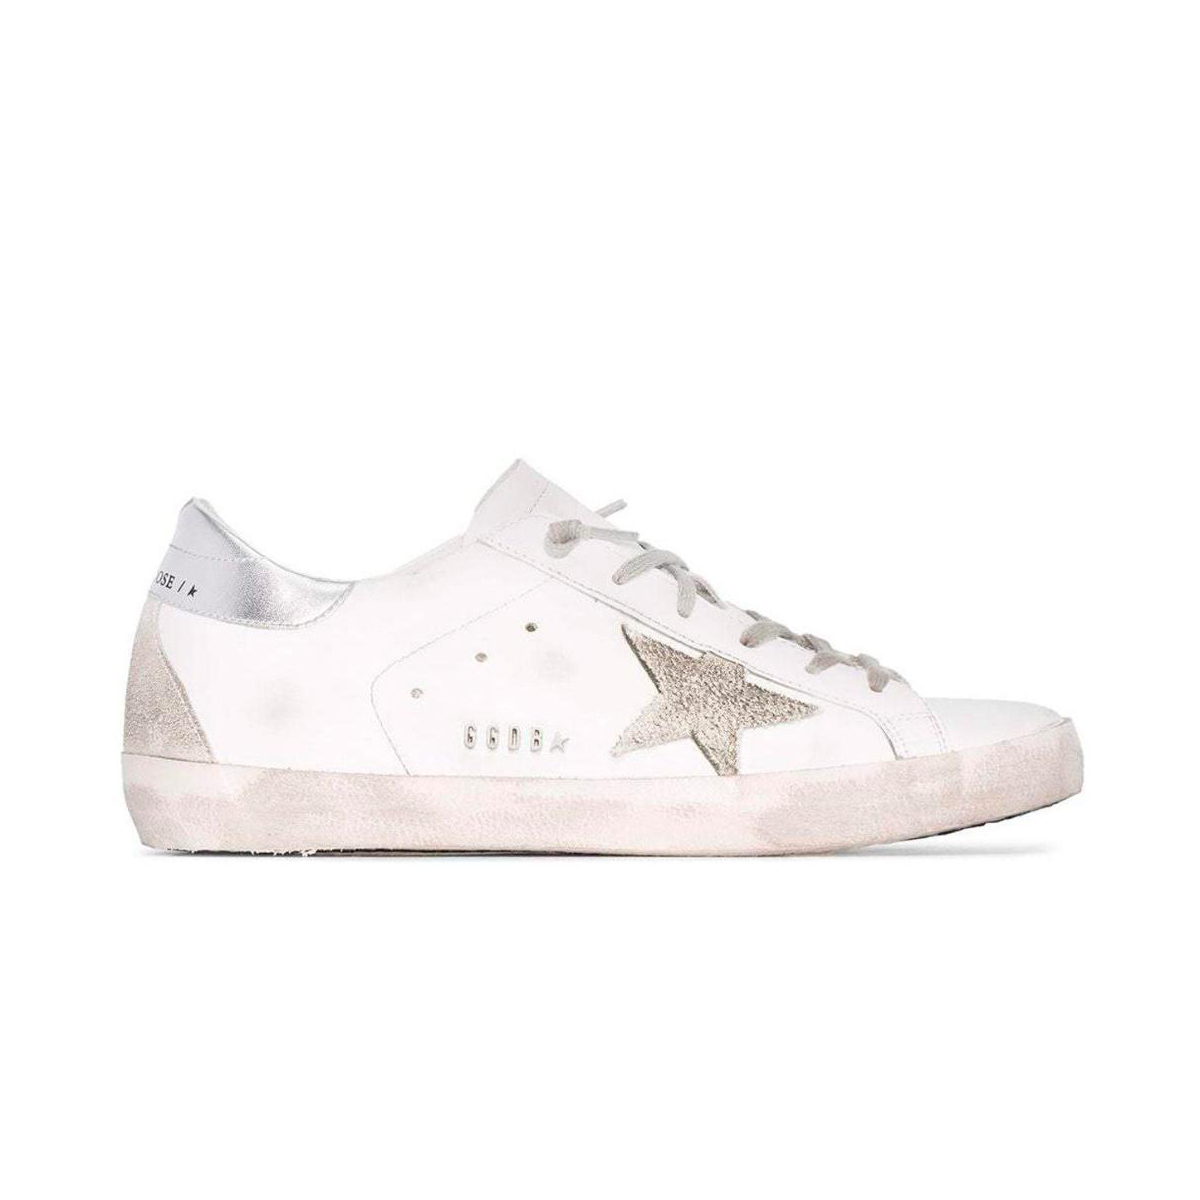 Super-Star sneakers with silver-coloured heel tab